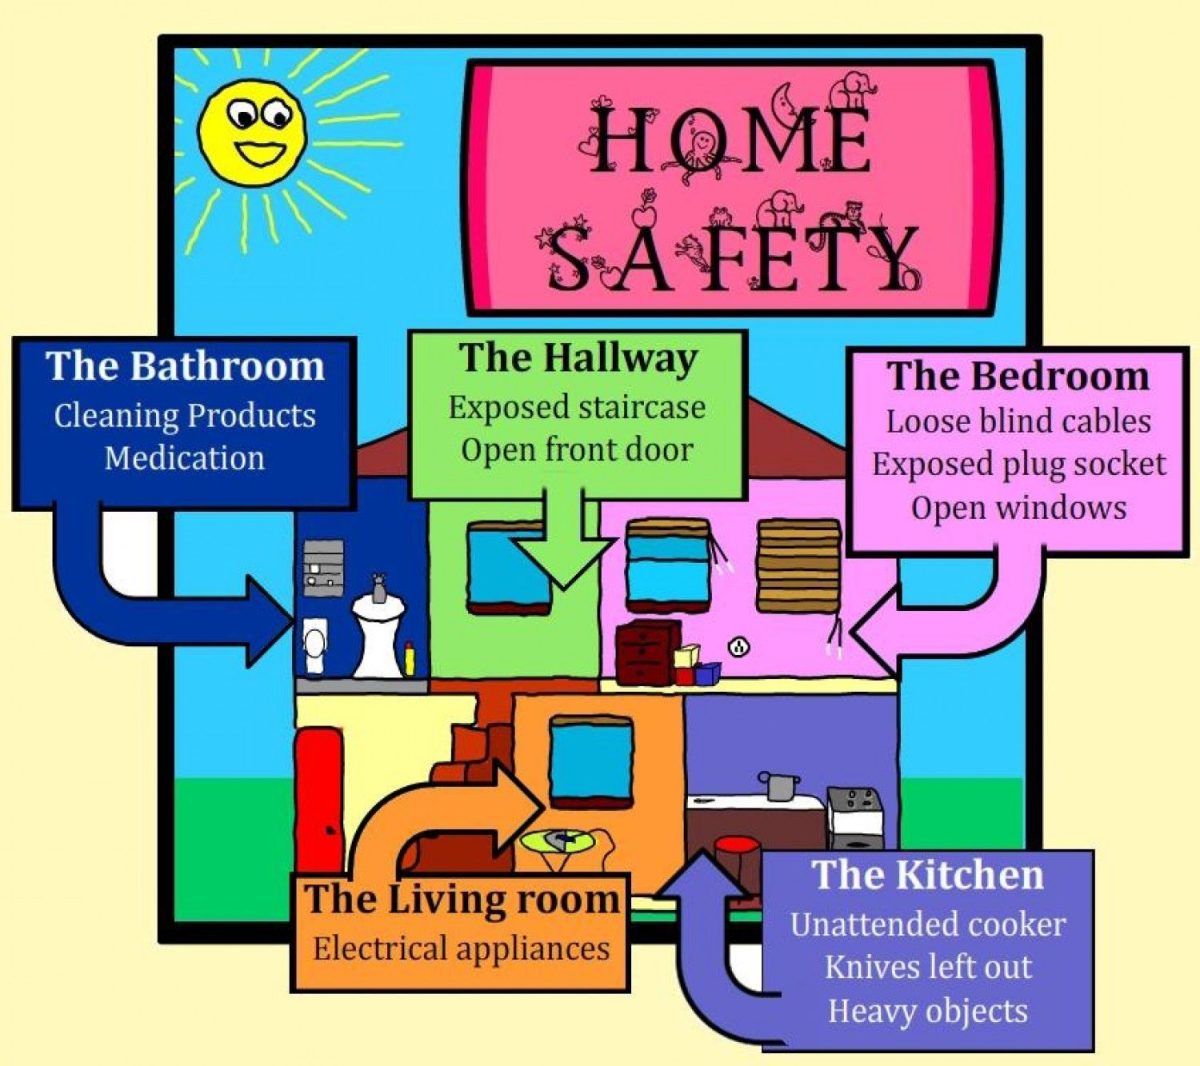 Safety Measures for Childproofing Homes and Environments